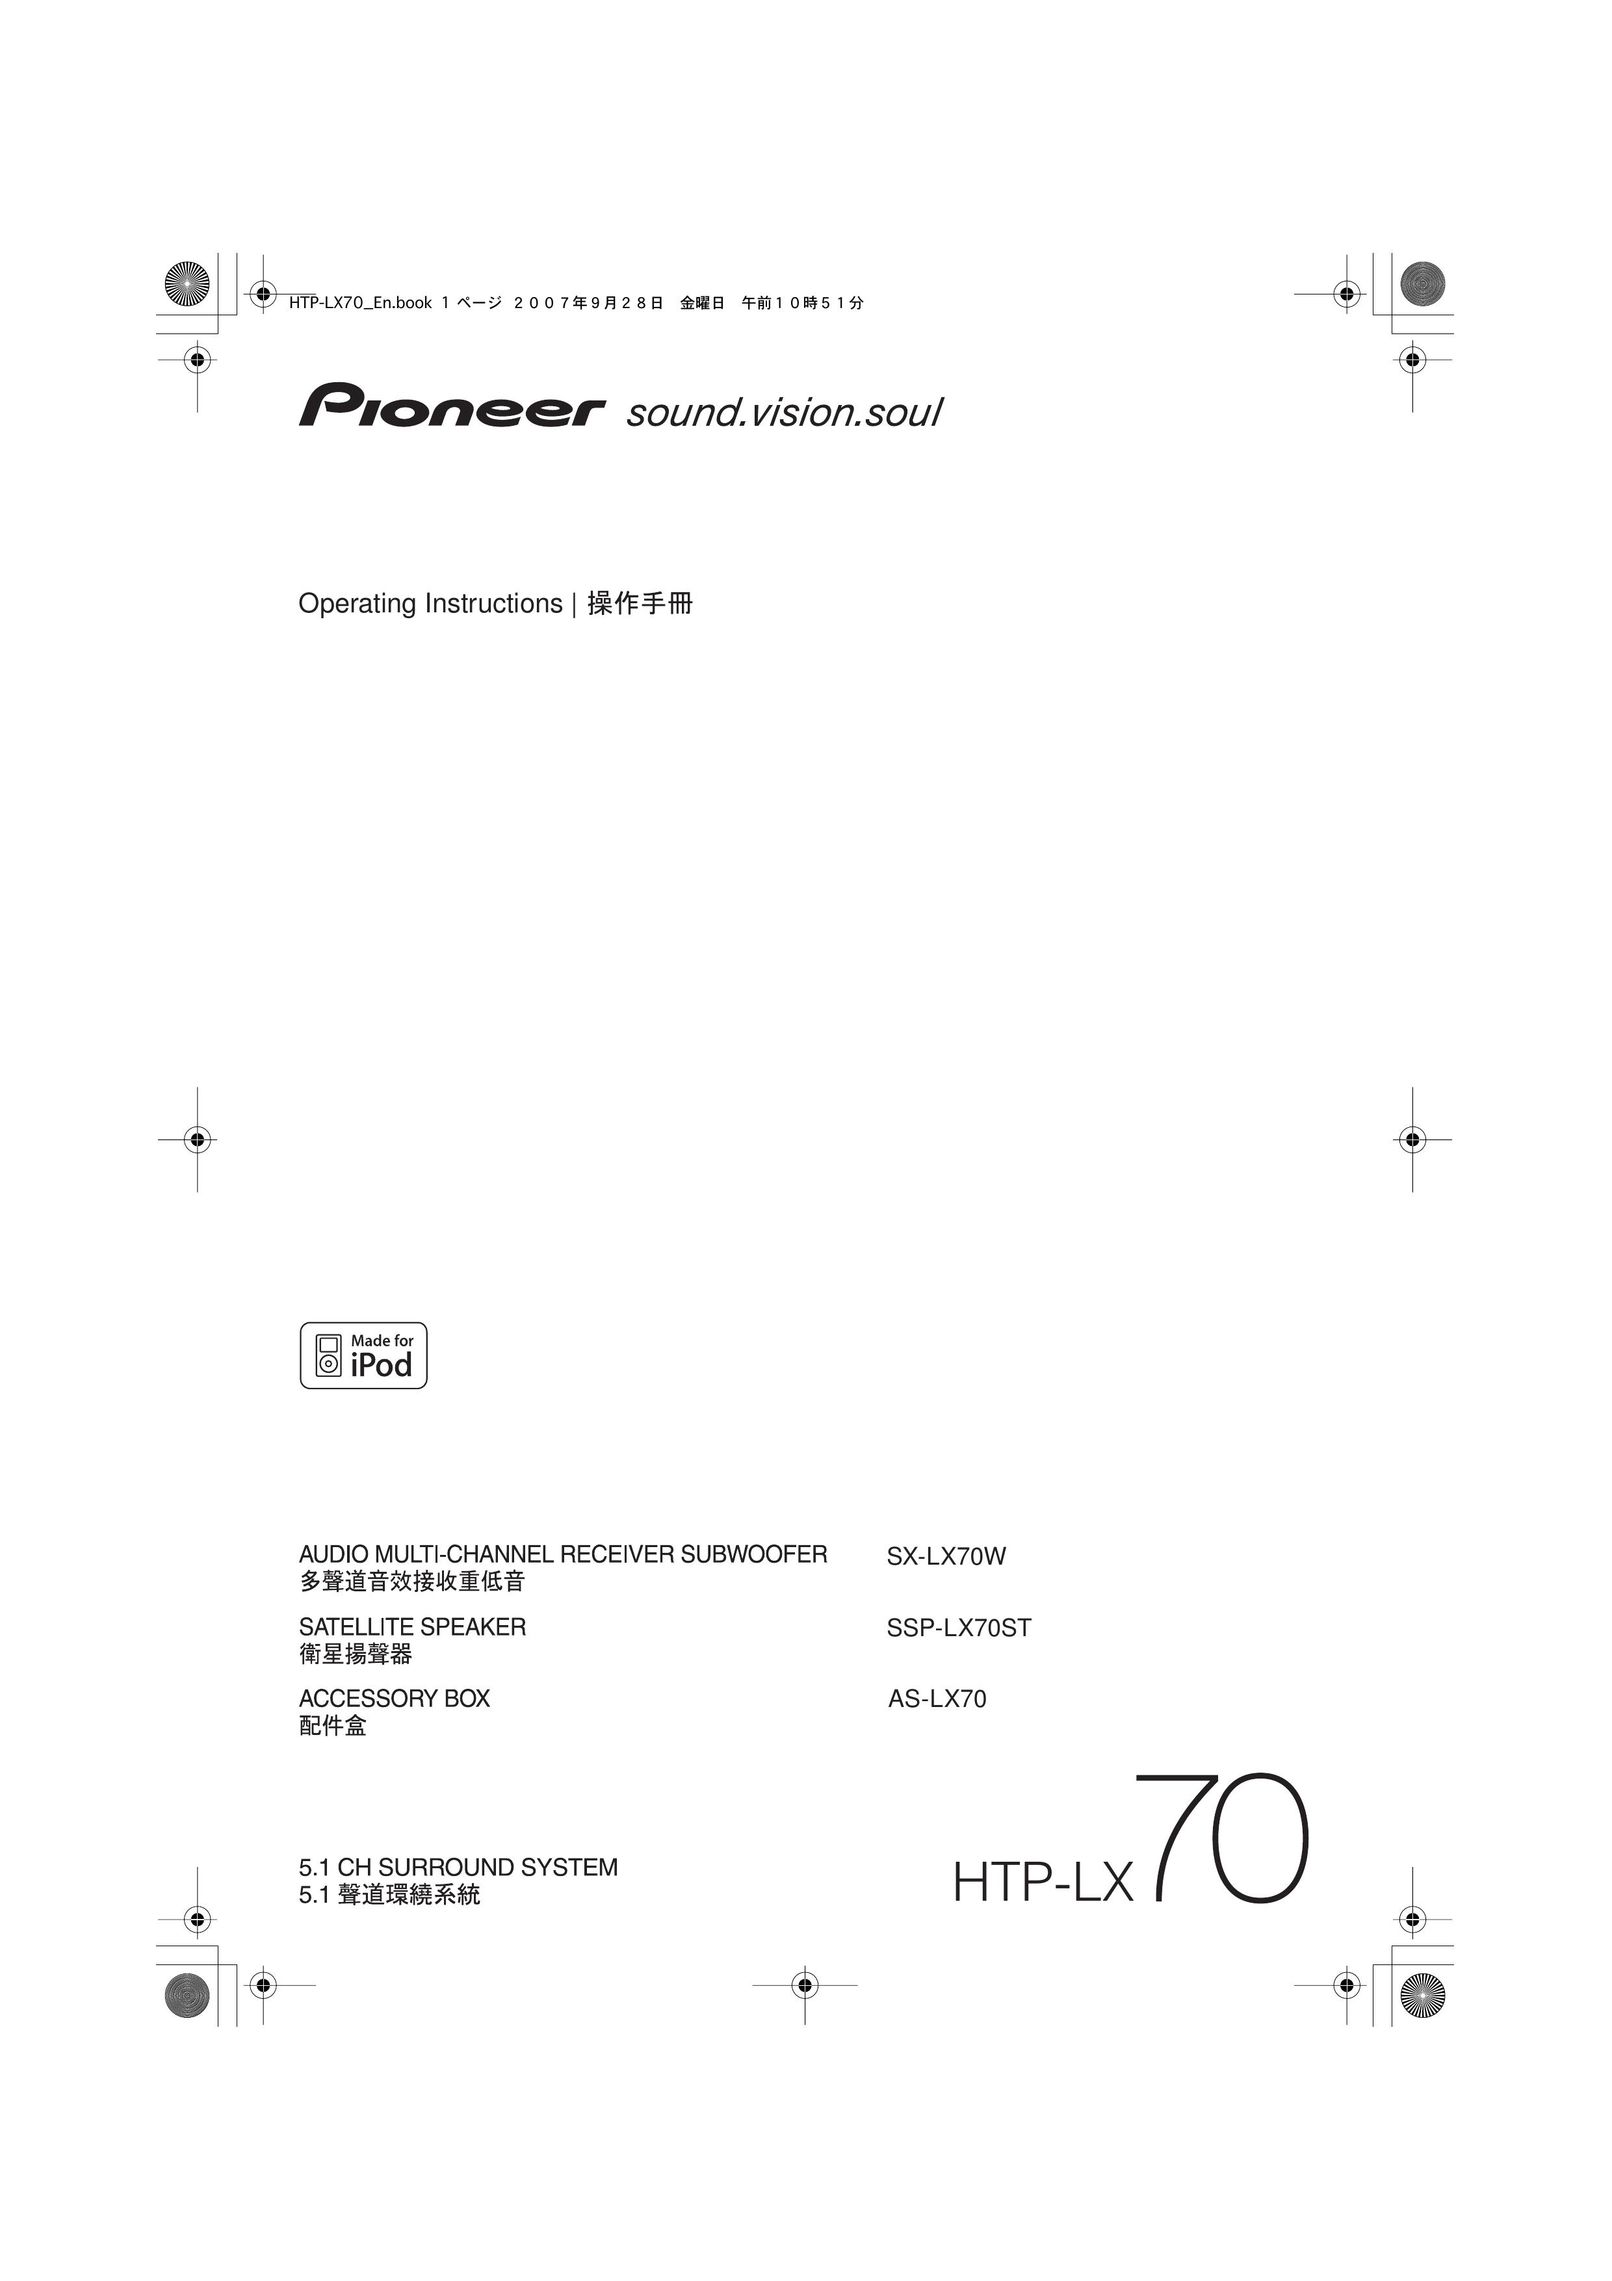 Pioneer AS-LX70 Home Theater System User Manual